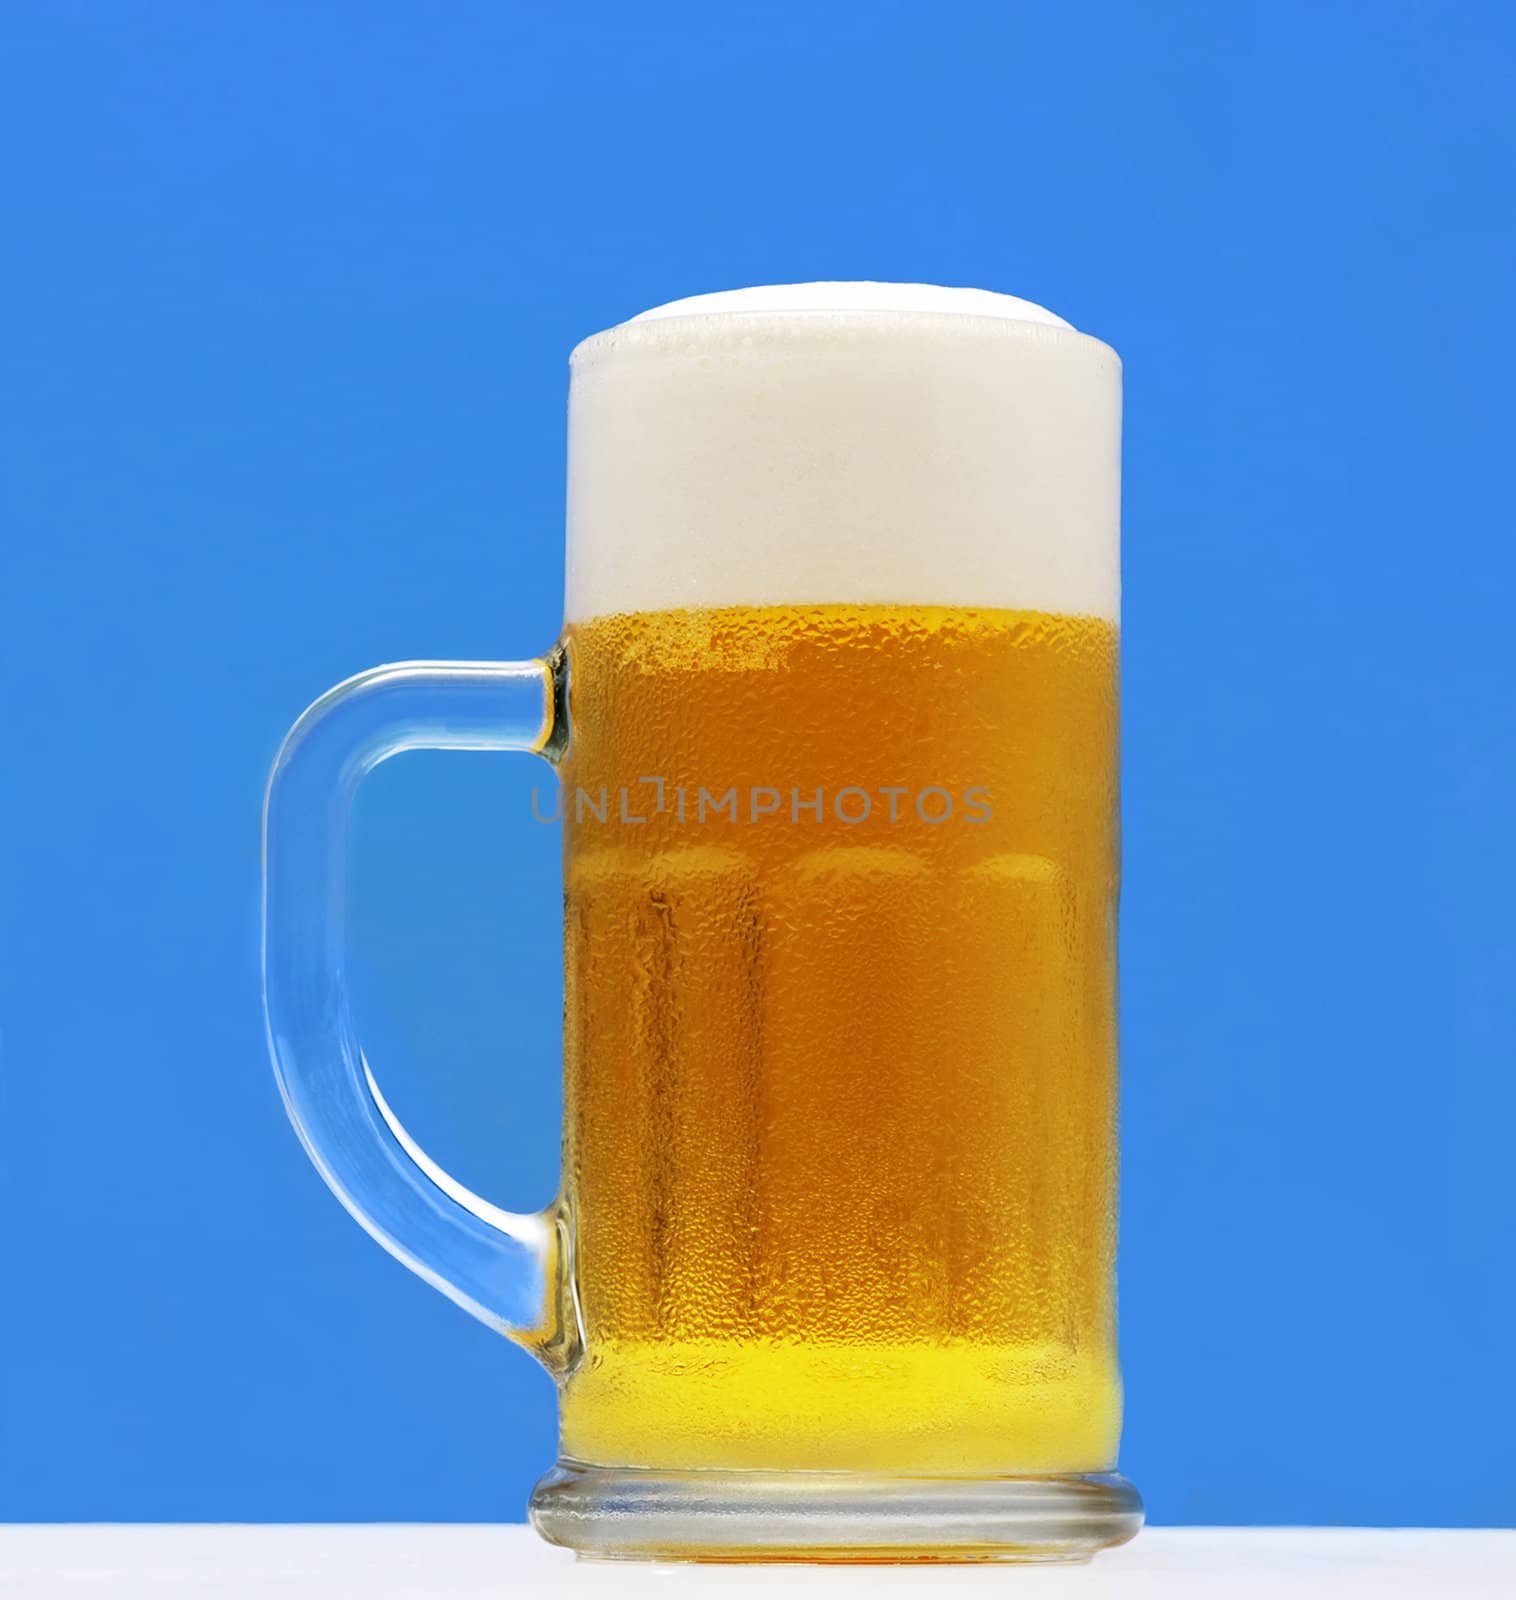 Beer glass on a blue background by ozaiachin